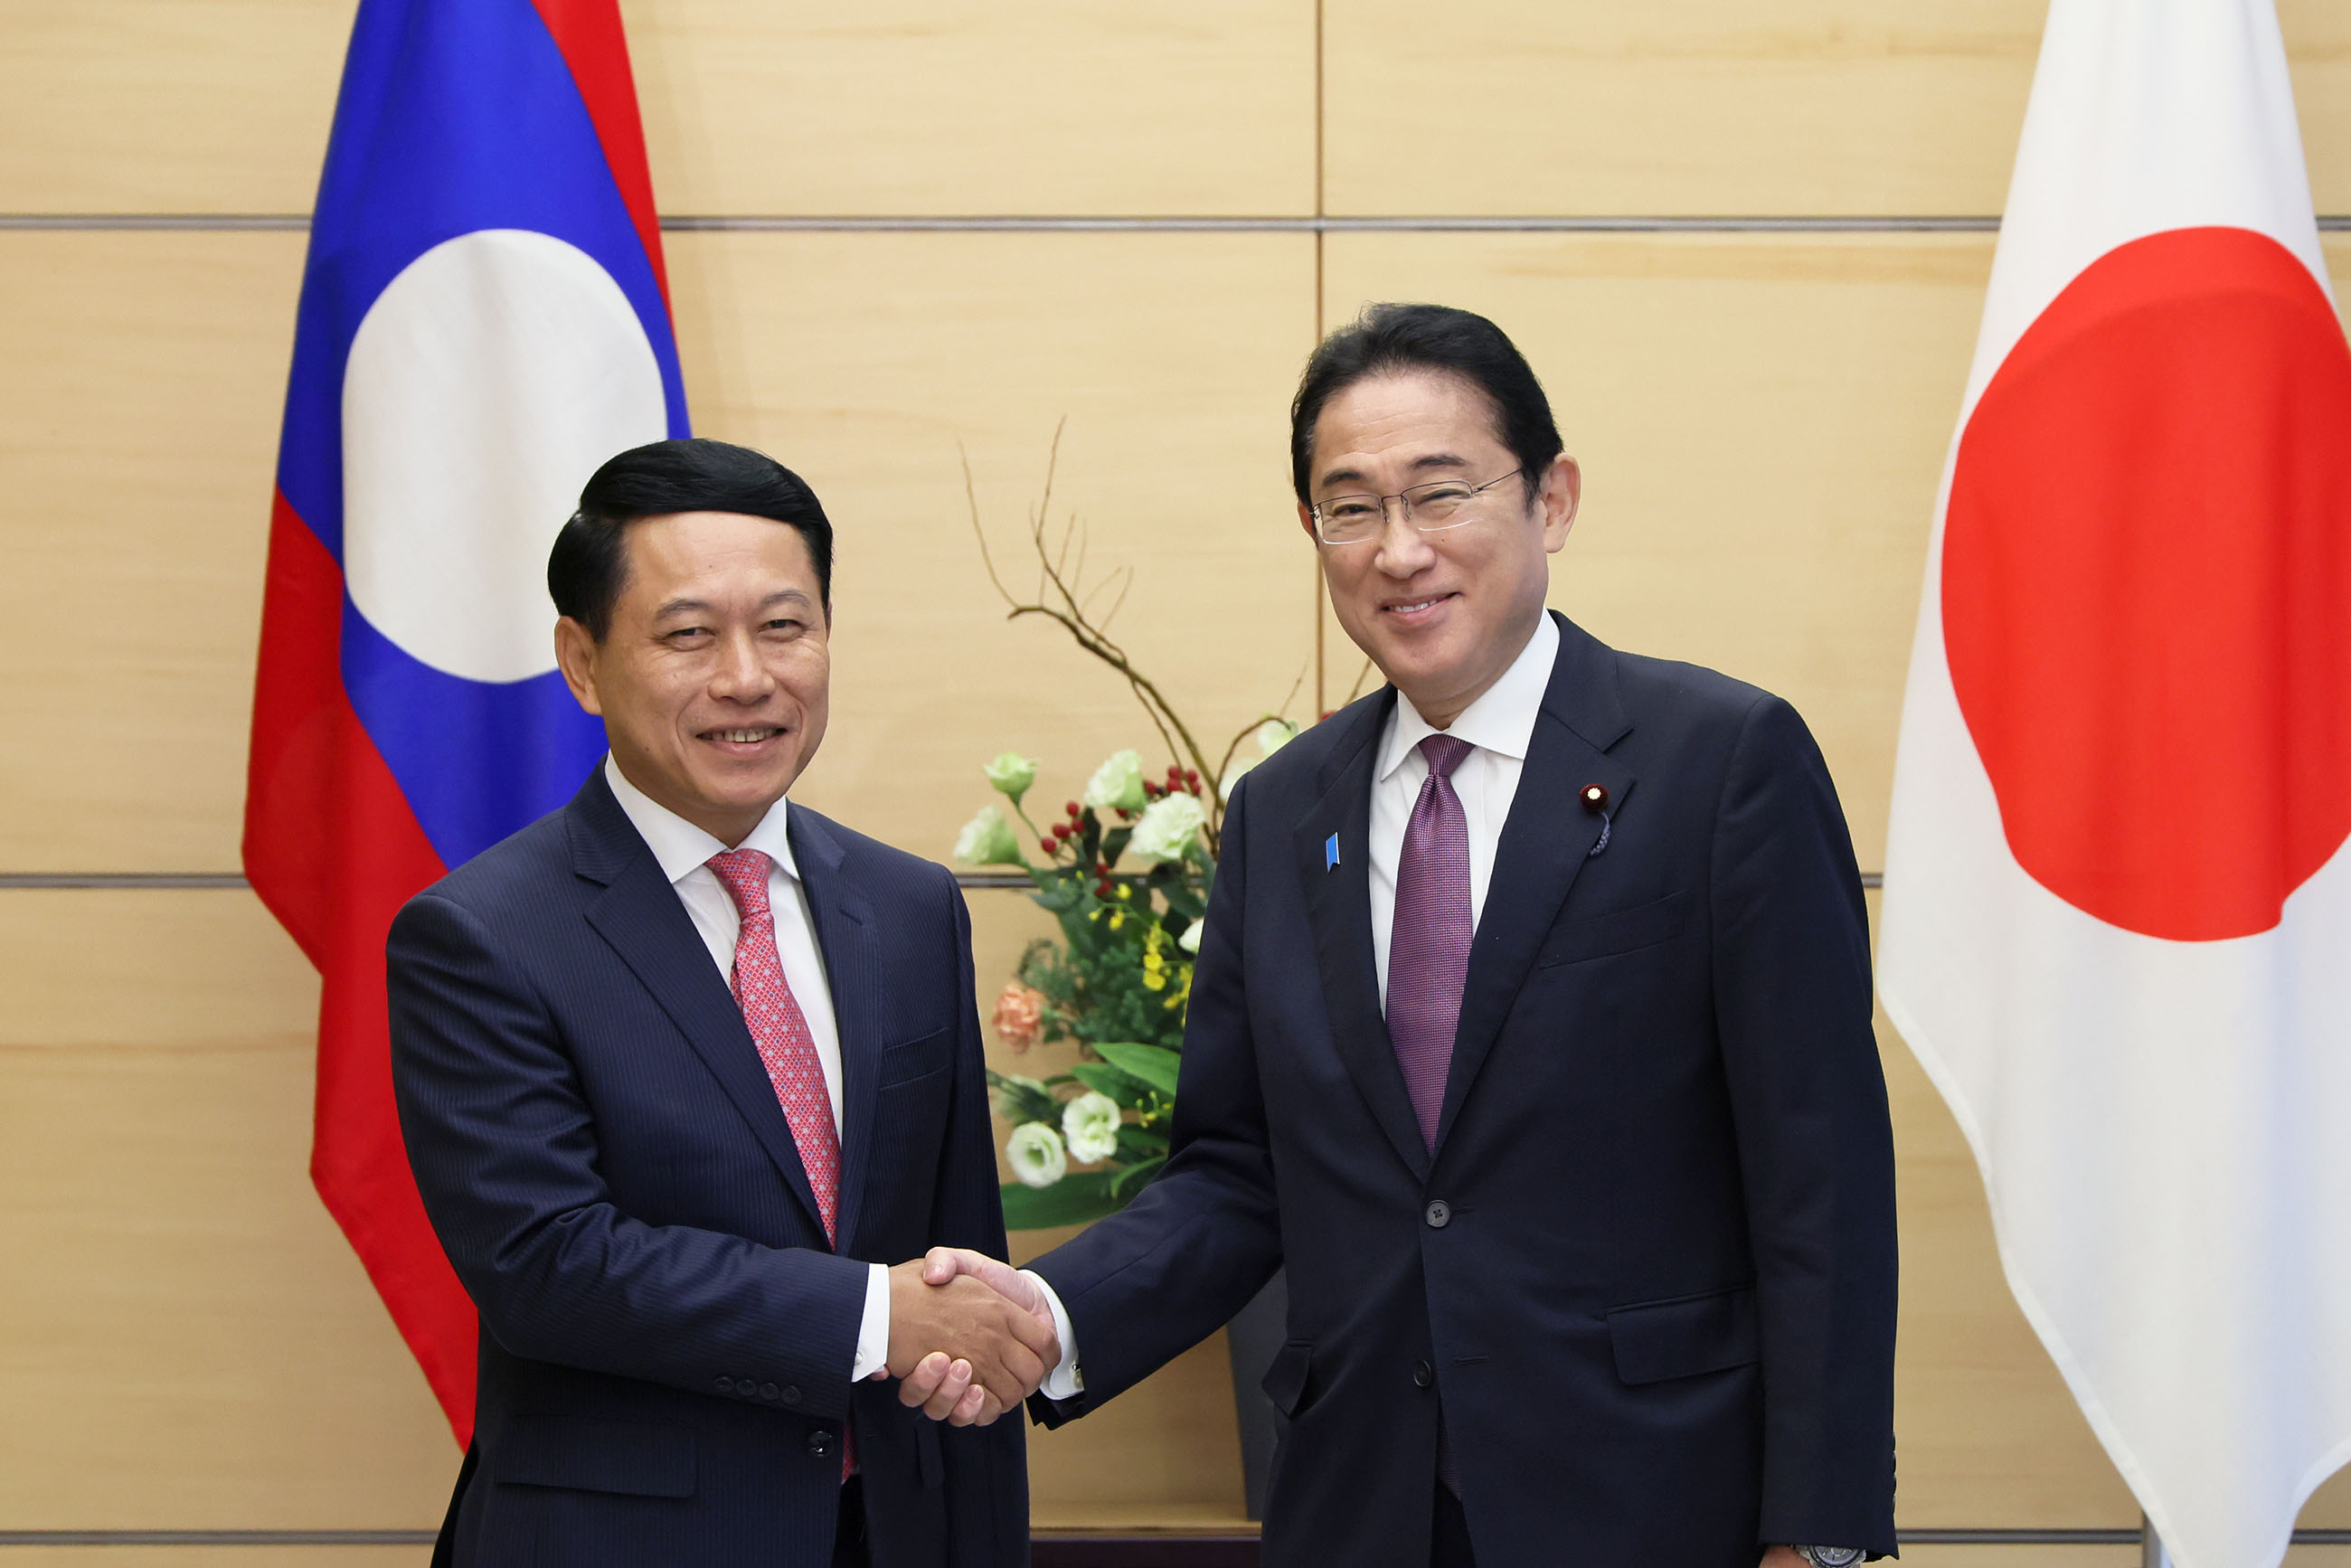 Courtesy Call from Deputy Prime Minister and Minister of Foreign Affairs of Laos Saleumxay Kommasith